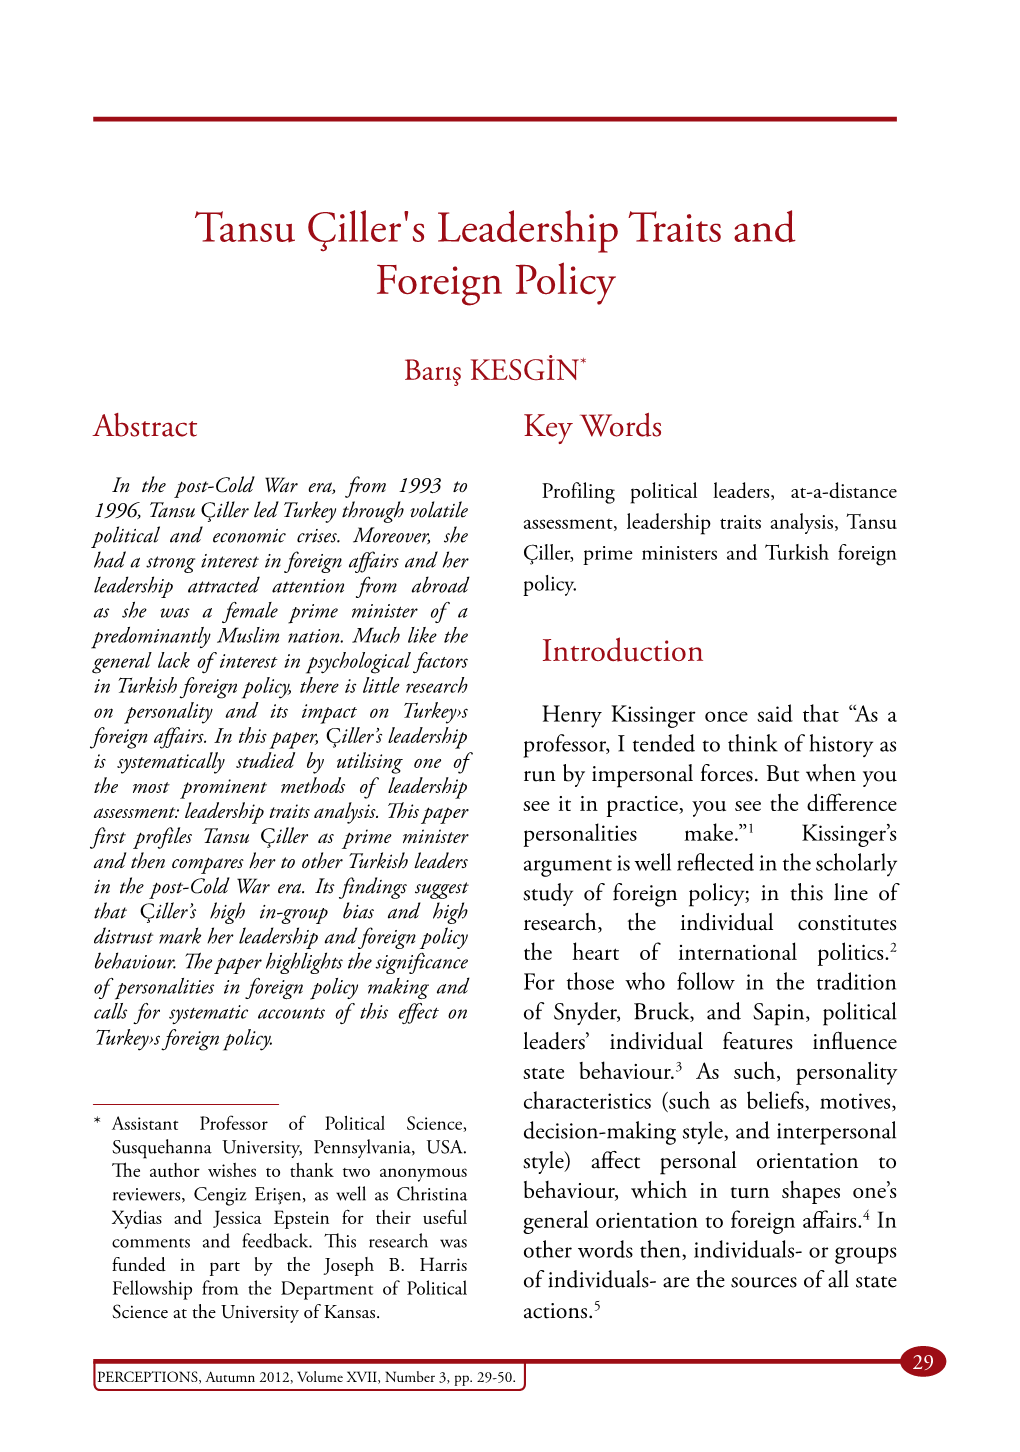 Tansu Çiller's Leadership Traits and Foreign Policy